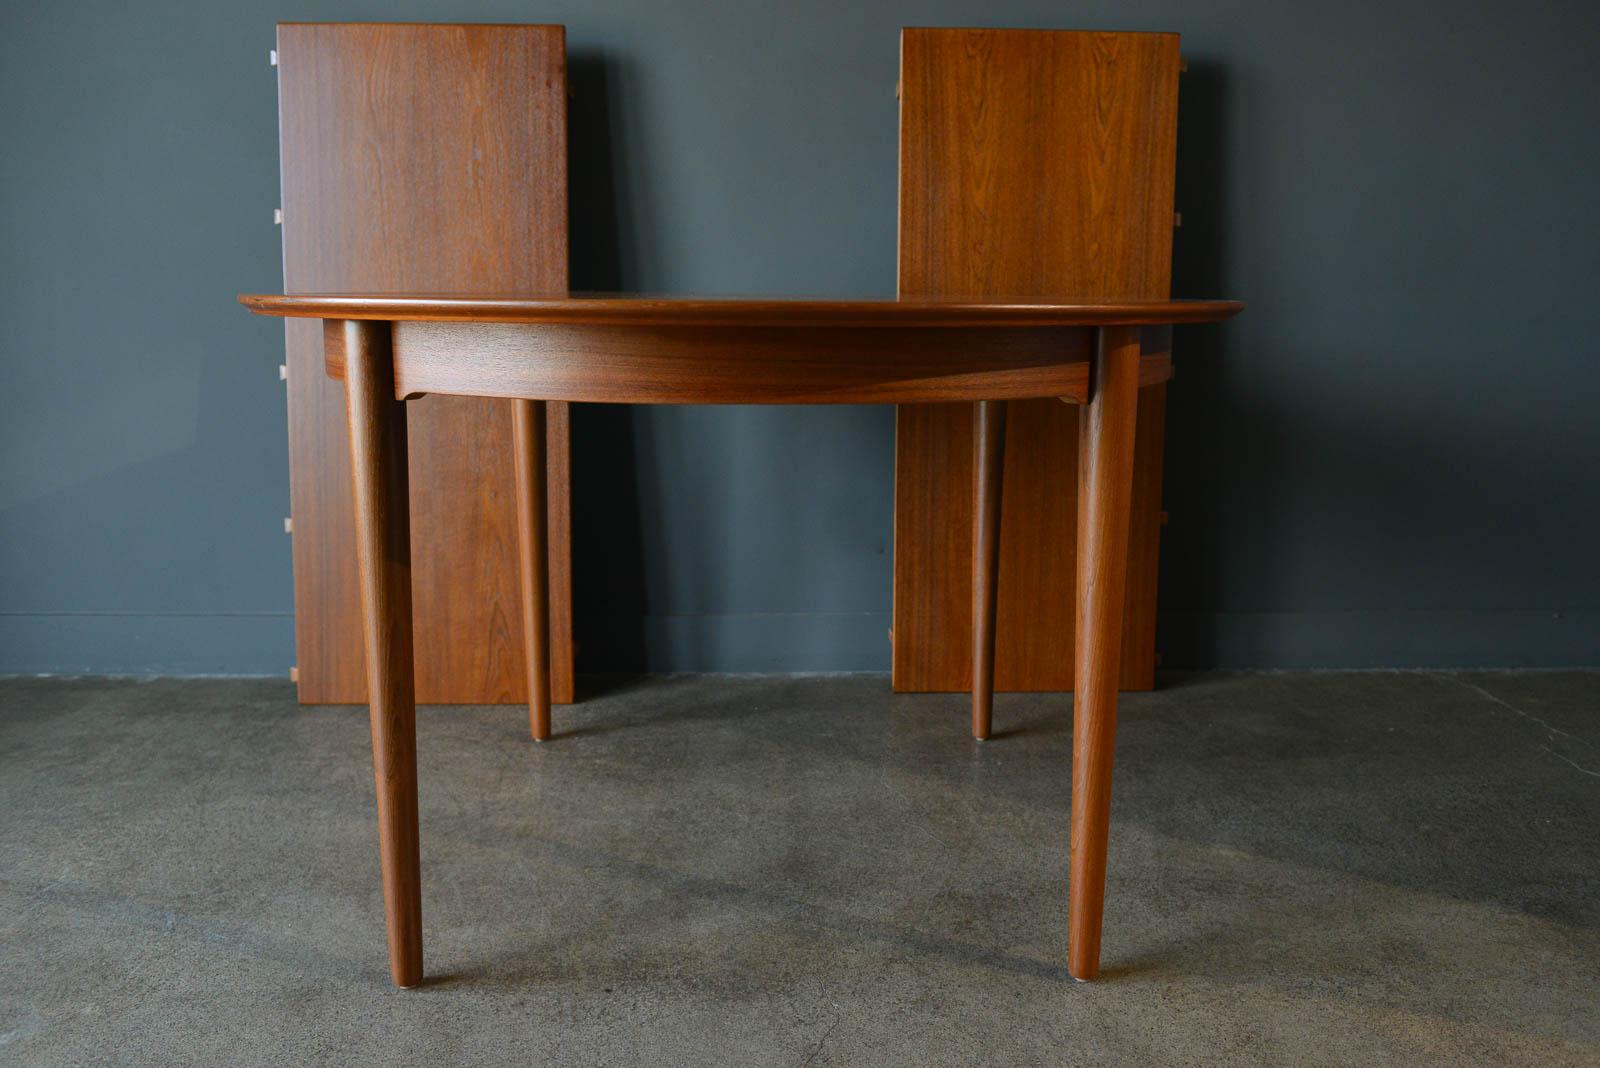 Teak expandable dining table by Niels Moller, circa 1960. Includes two matching leaves when inserted can seat 8 comfortably in an oval shape. Compact design allows for a round table that seats 4. Professionally restored in perfect condition, this